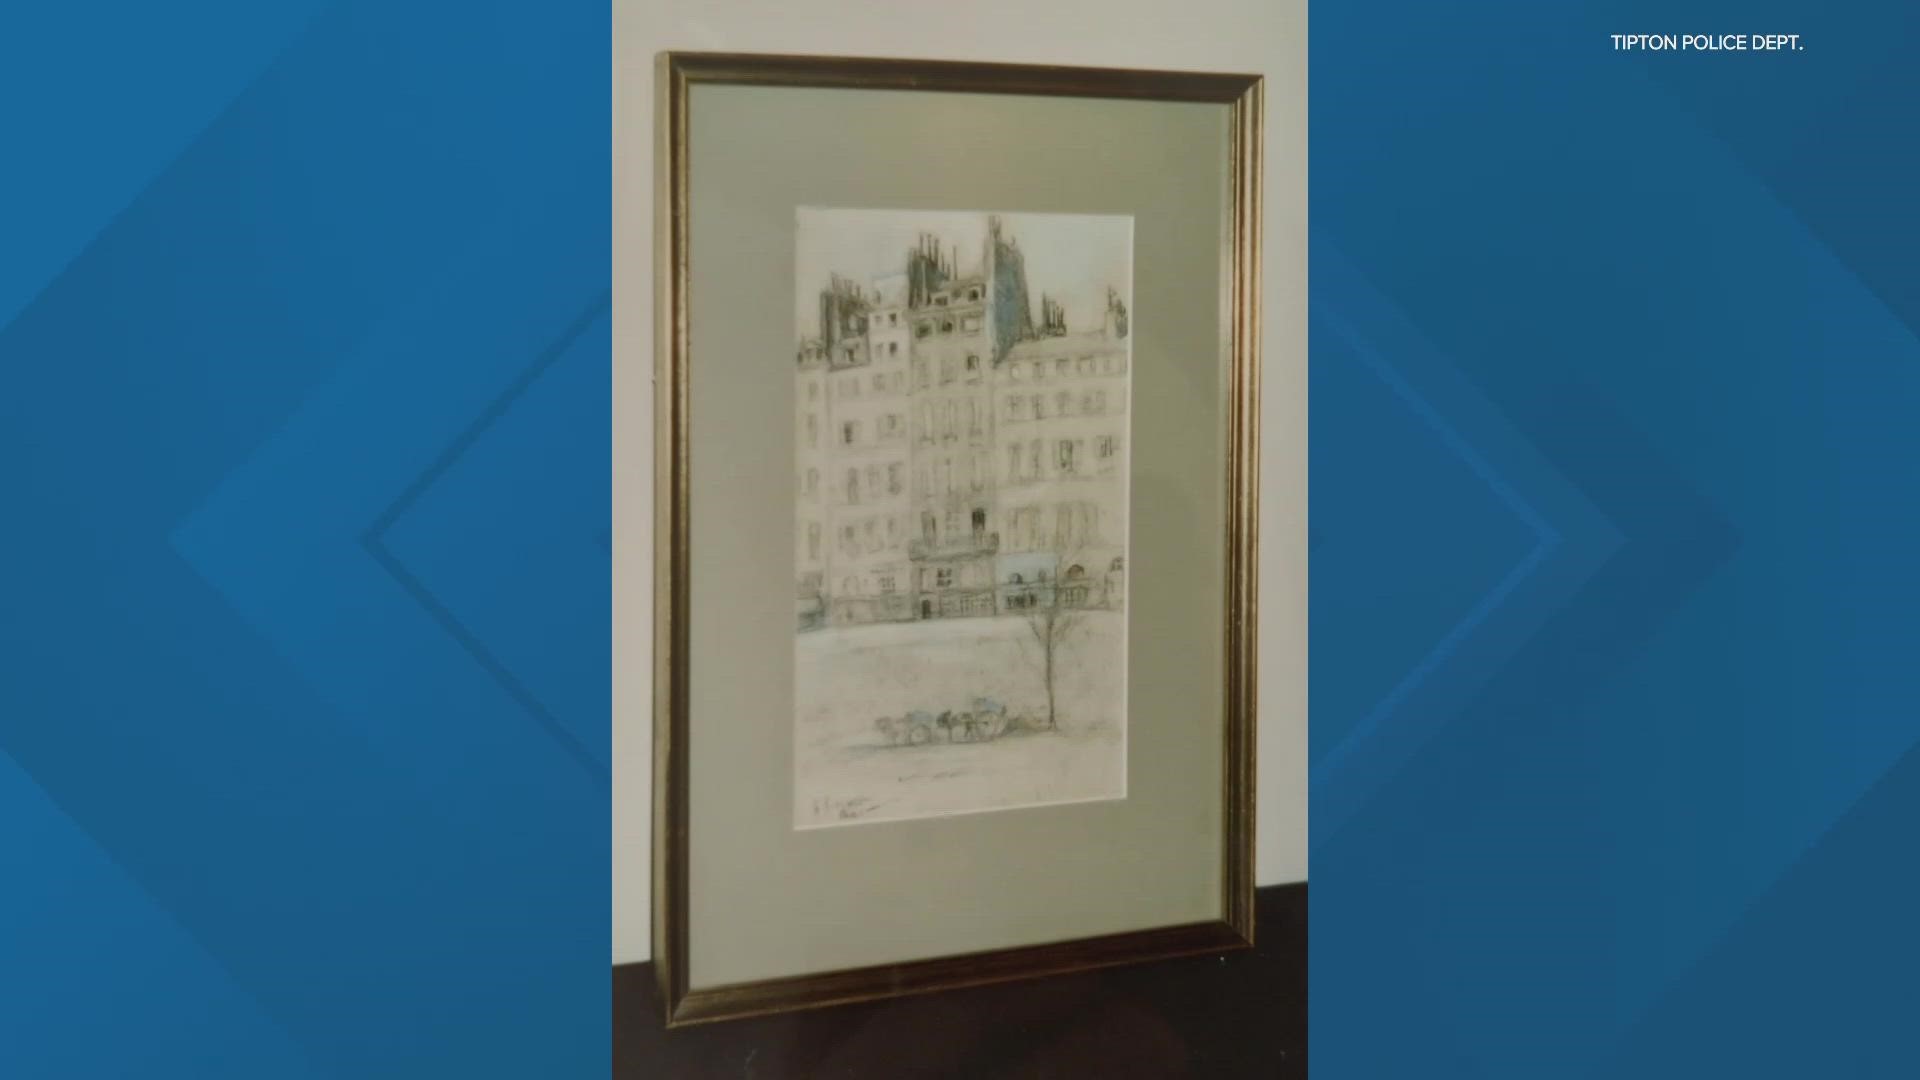 The painting was created in 1920 by Hoosier artist Glenn Cooper Henshaw and is valued at more than $1,000.